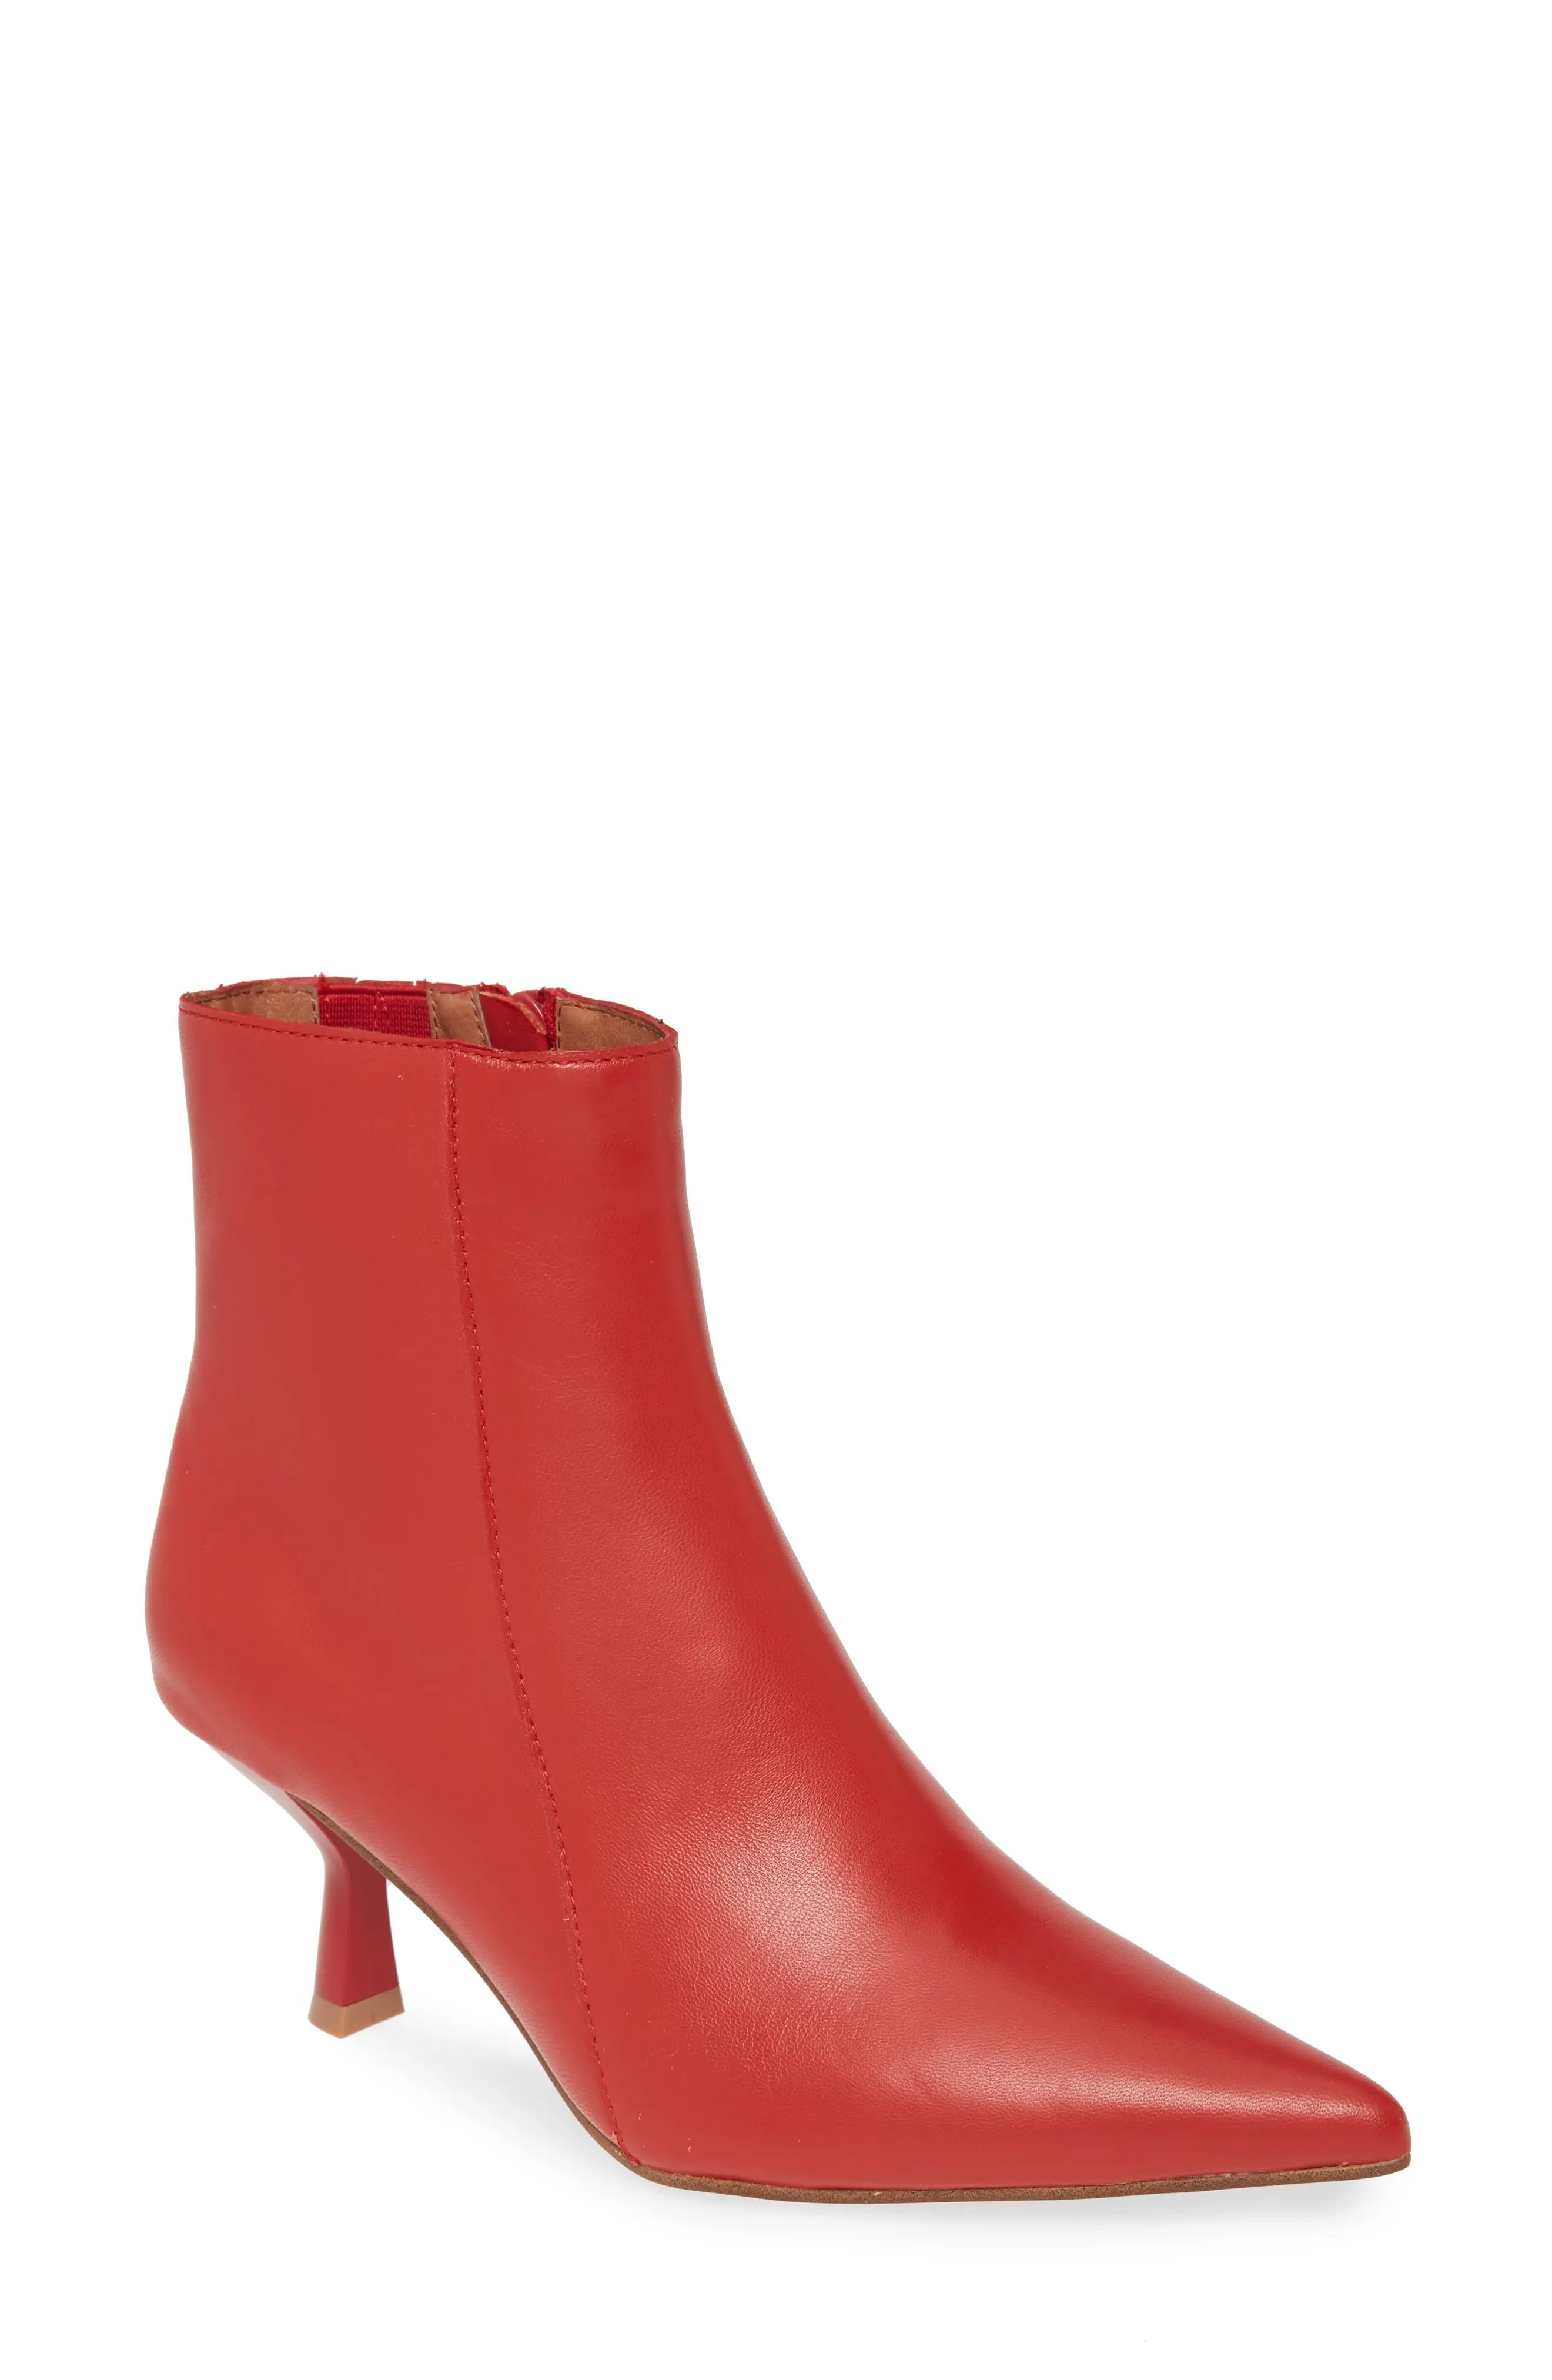 Women's Jeffrey Campbell Egnyte Sock Bootie, Size 6 M - Red | Nordstrom